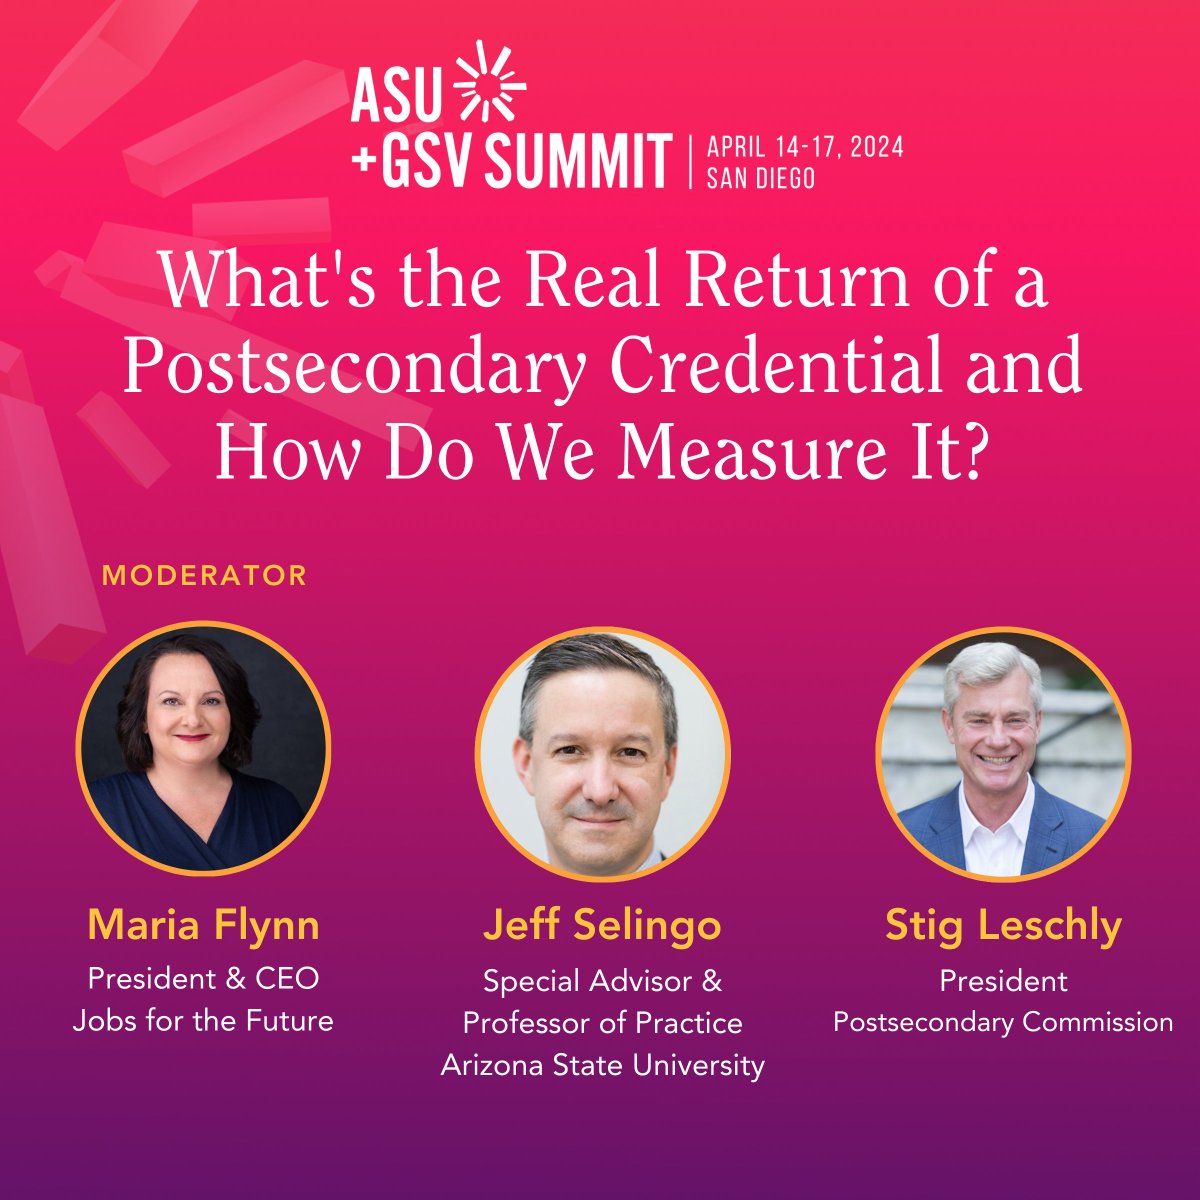 Tuesday, April 16 at 11 am in Cortez Hill C, Level 3, join @MariaKFlynn, @jselingo, and @sleschly to hear different perspectives on measuring and sharing higher education’s economic returns. #asugsvsummit Save this page to stay updated: bit.ly/3VUUC4O